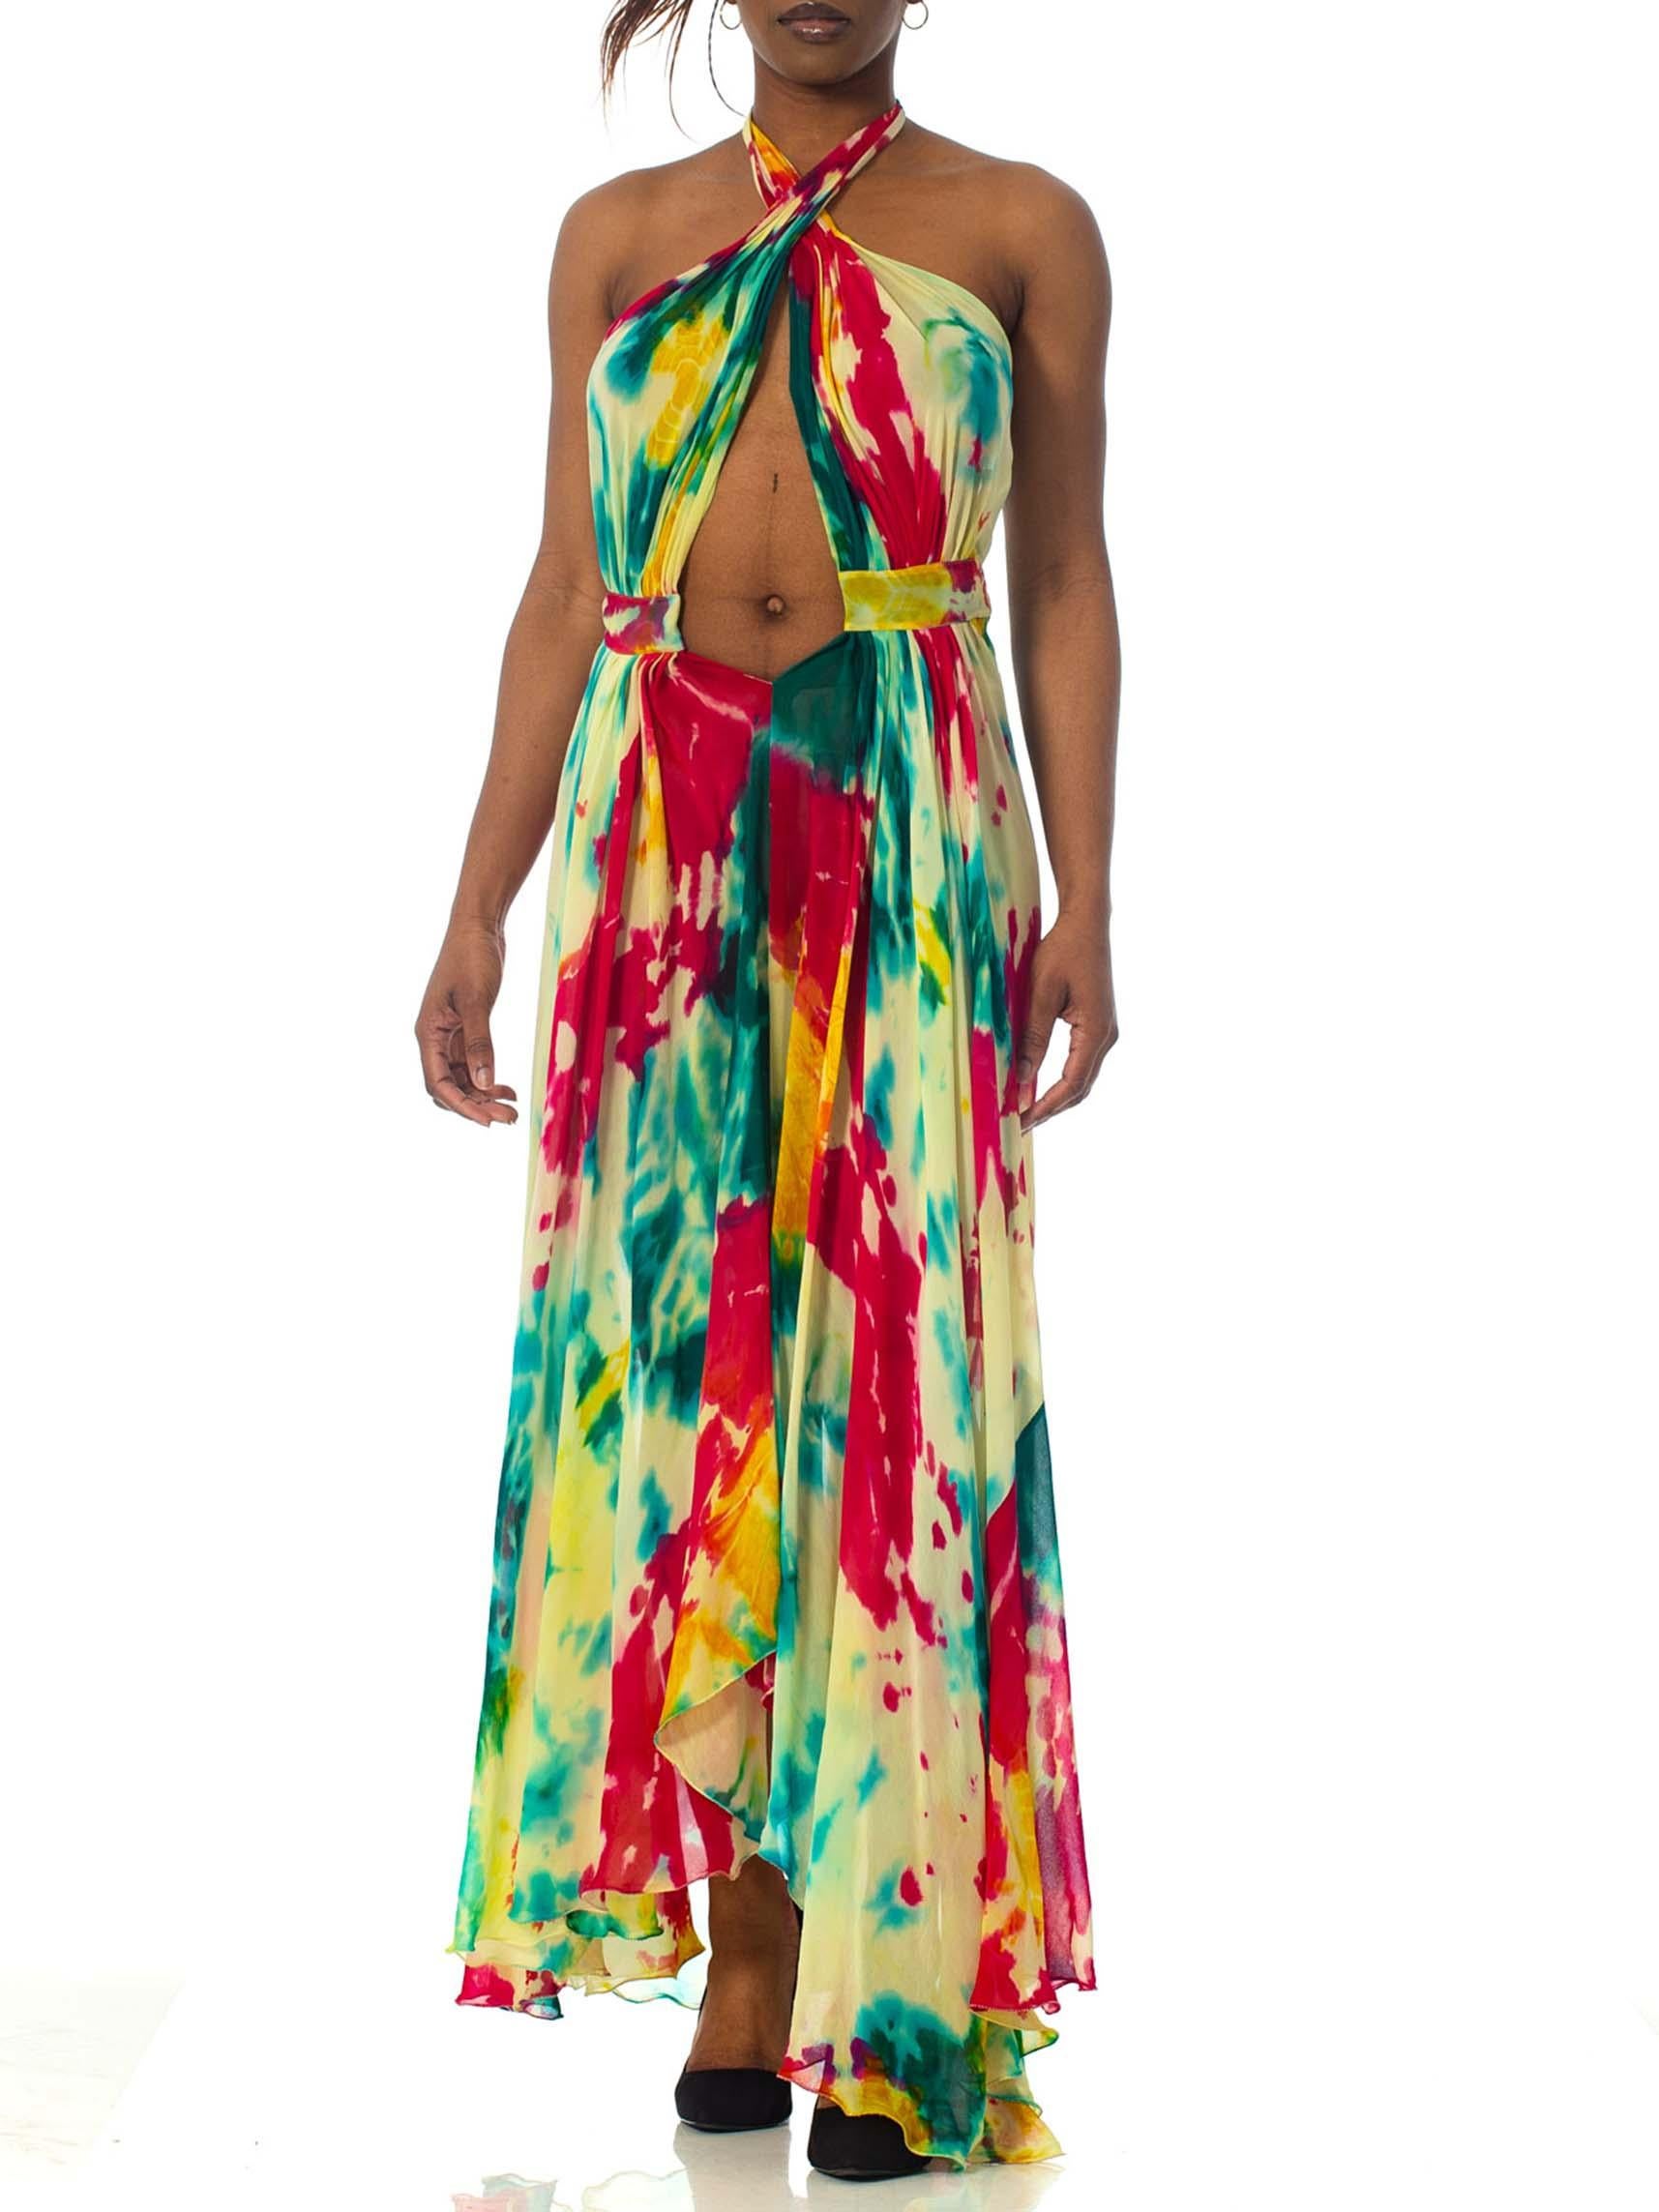 MORPHEW COLLECTION Tie Dyed Silk Chiffon Backless Halter Maxi Dress
MORPHEW COLLECTION is made entirely by hand in our NYC Ateliér of rare antique materials sourced from around the globe. Our sustainable vintage materials represent over a century of